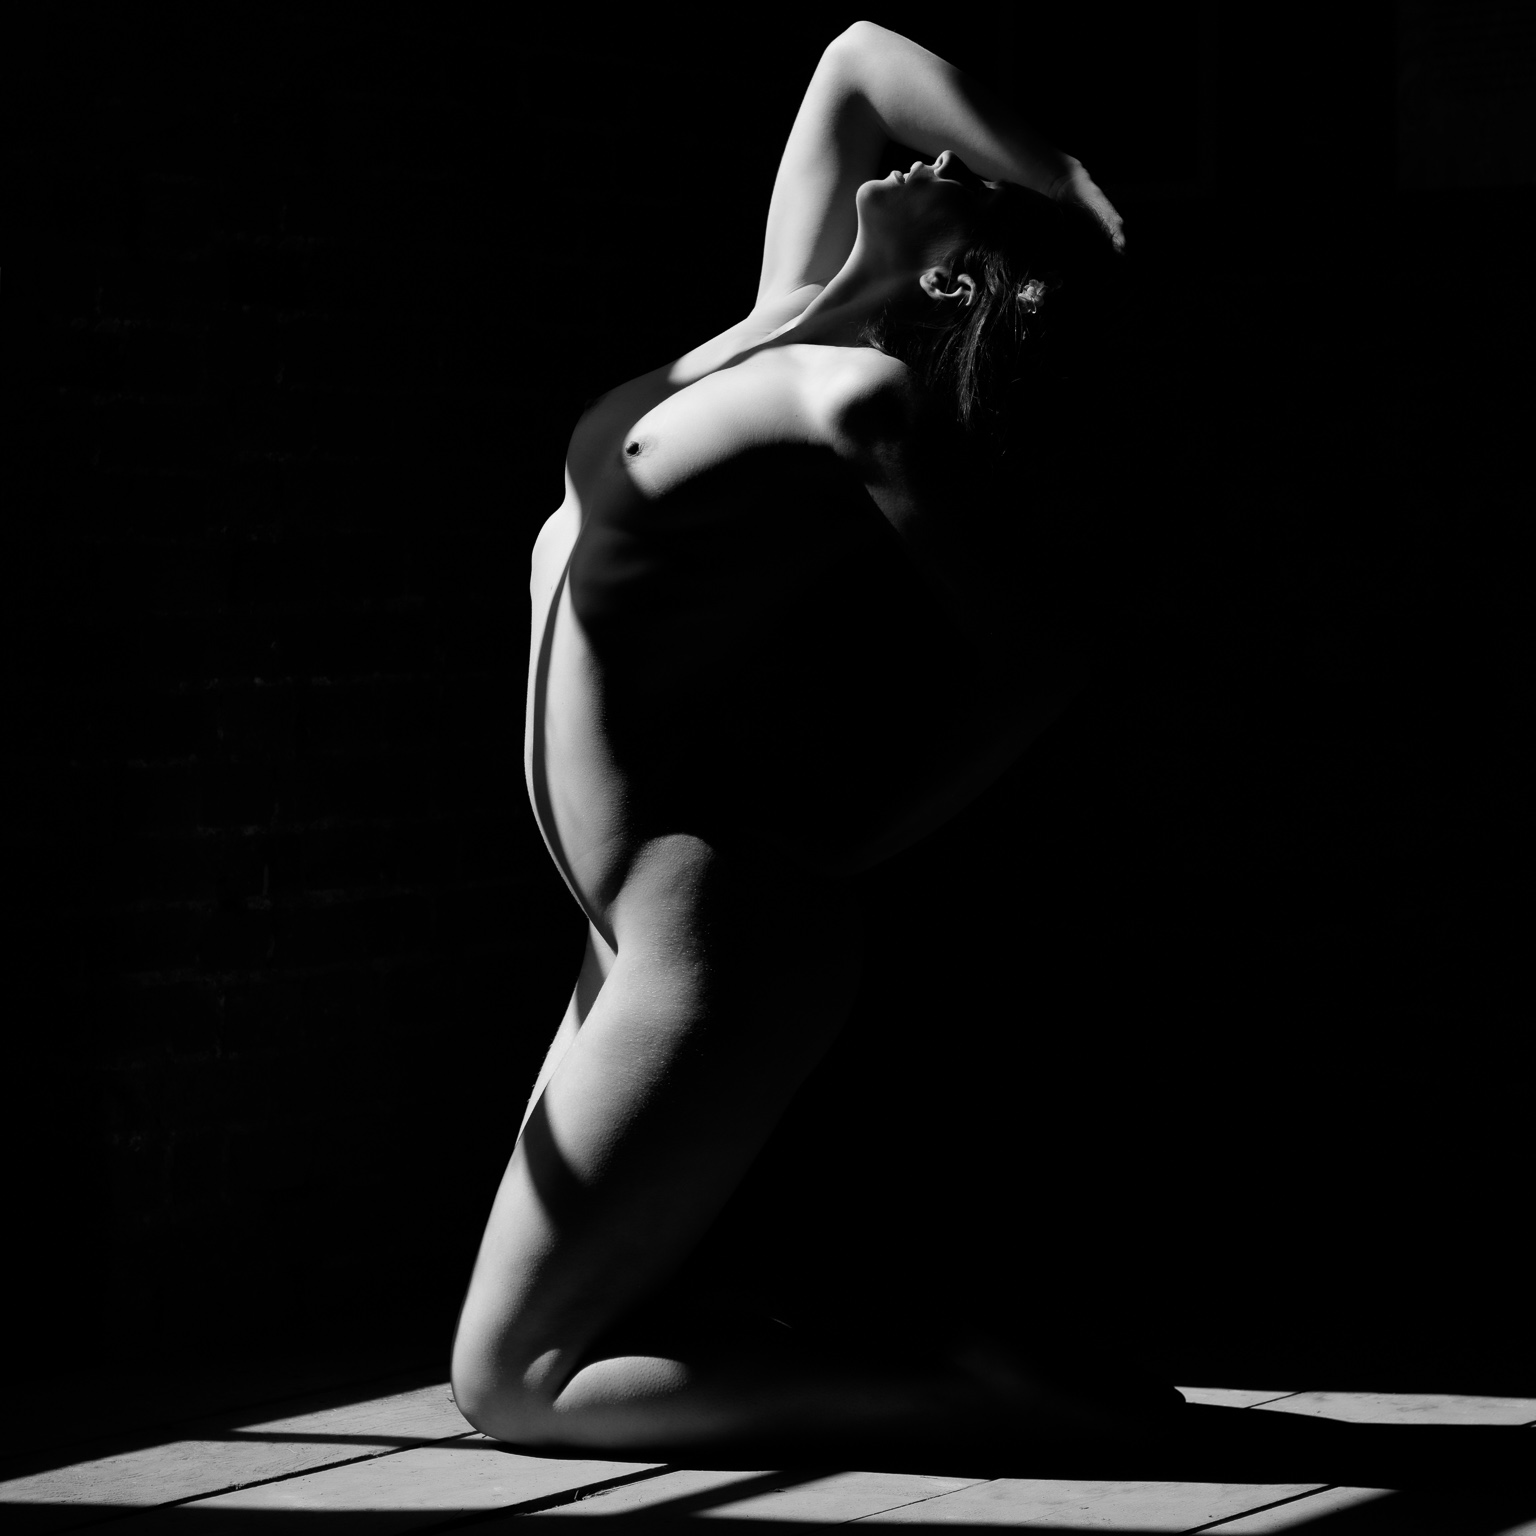 art nude model in the dark lit by light from a window with abstract shadows covering face and part of body